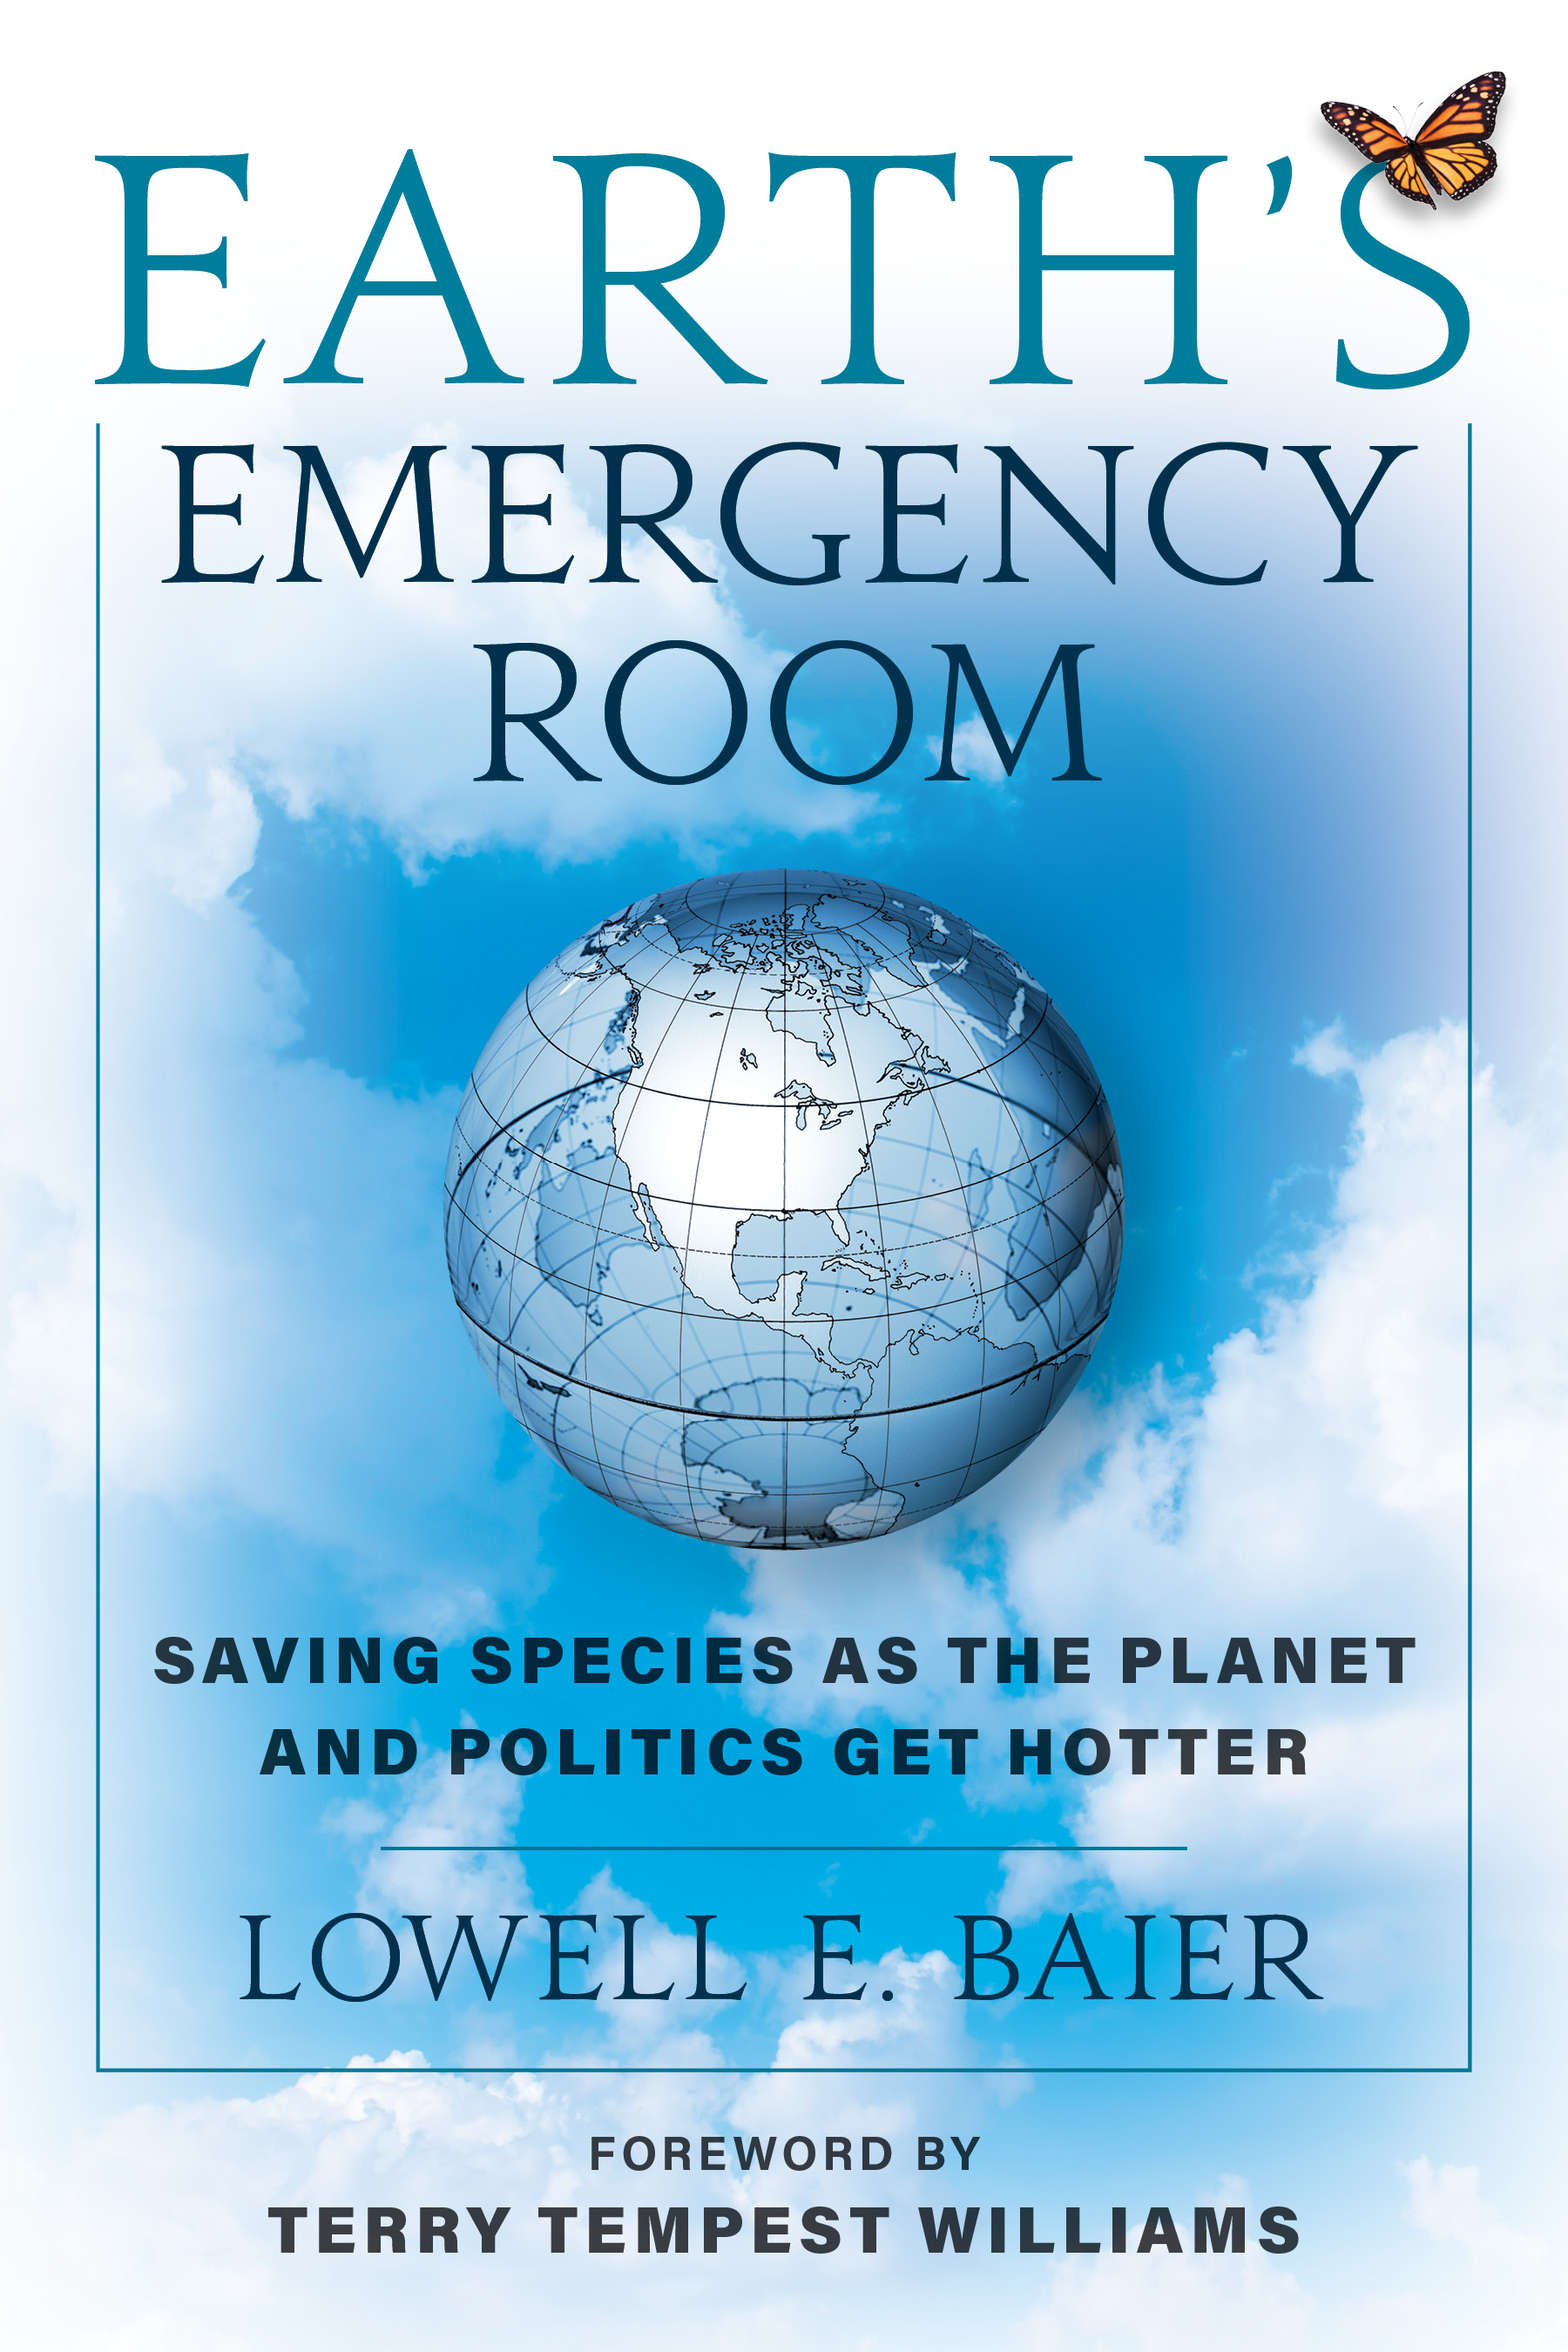 Earth's Emergency Room: Saving Species as the Planet and Politics Get Hotter